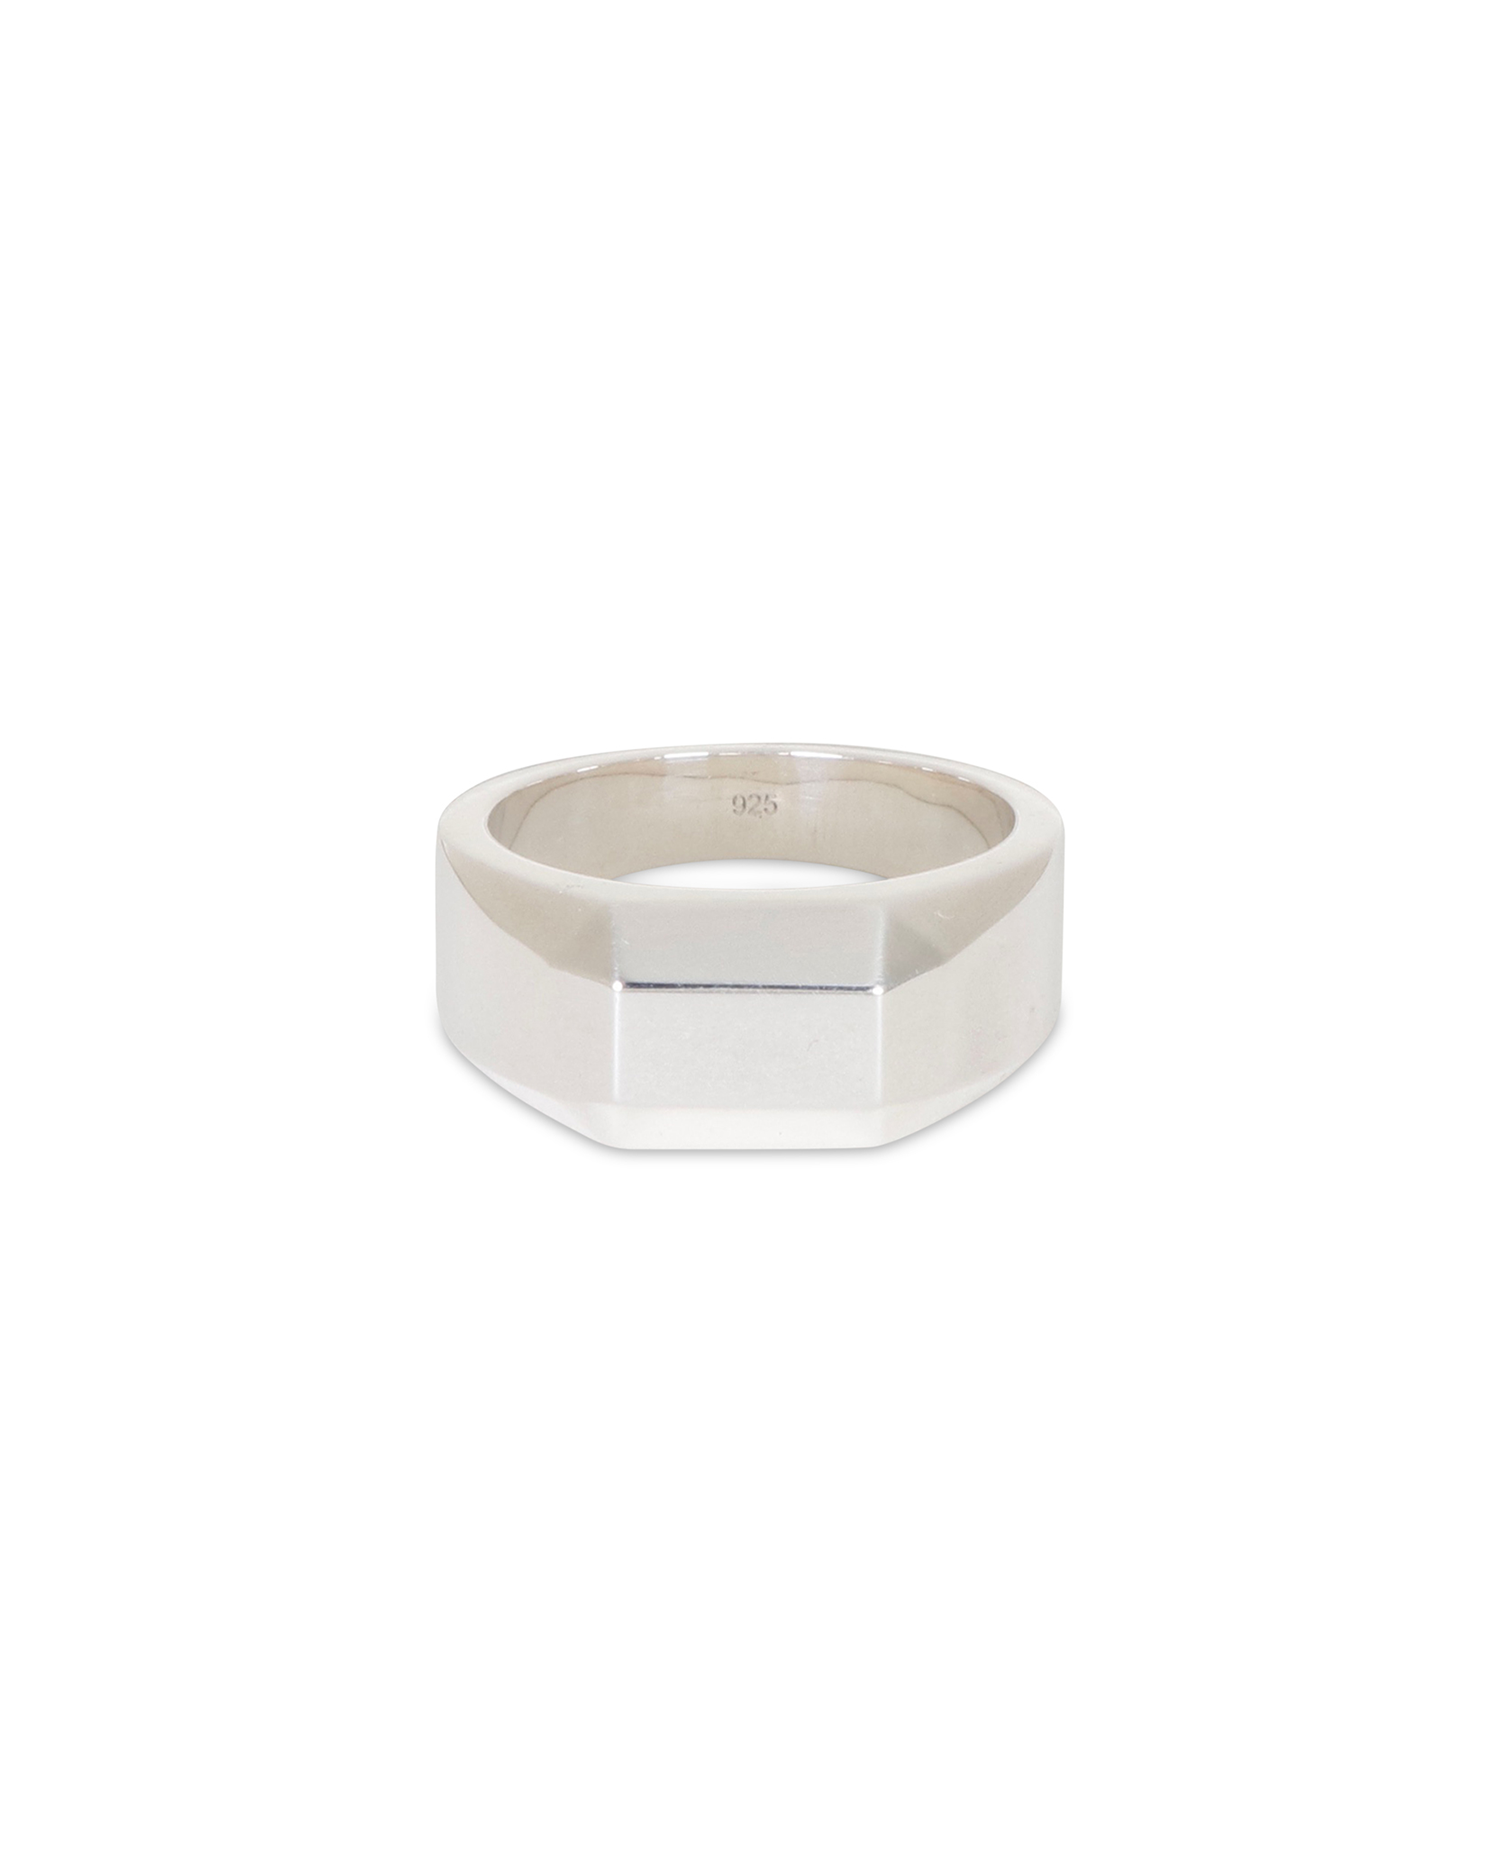 Bank Signet Ring - 925 Sterling Silver